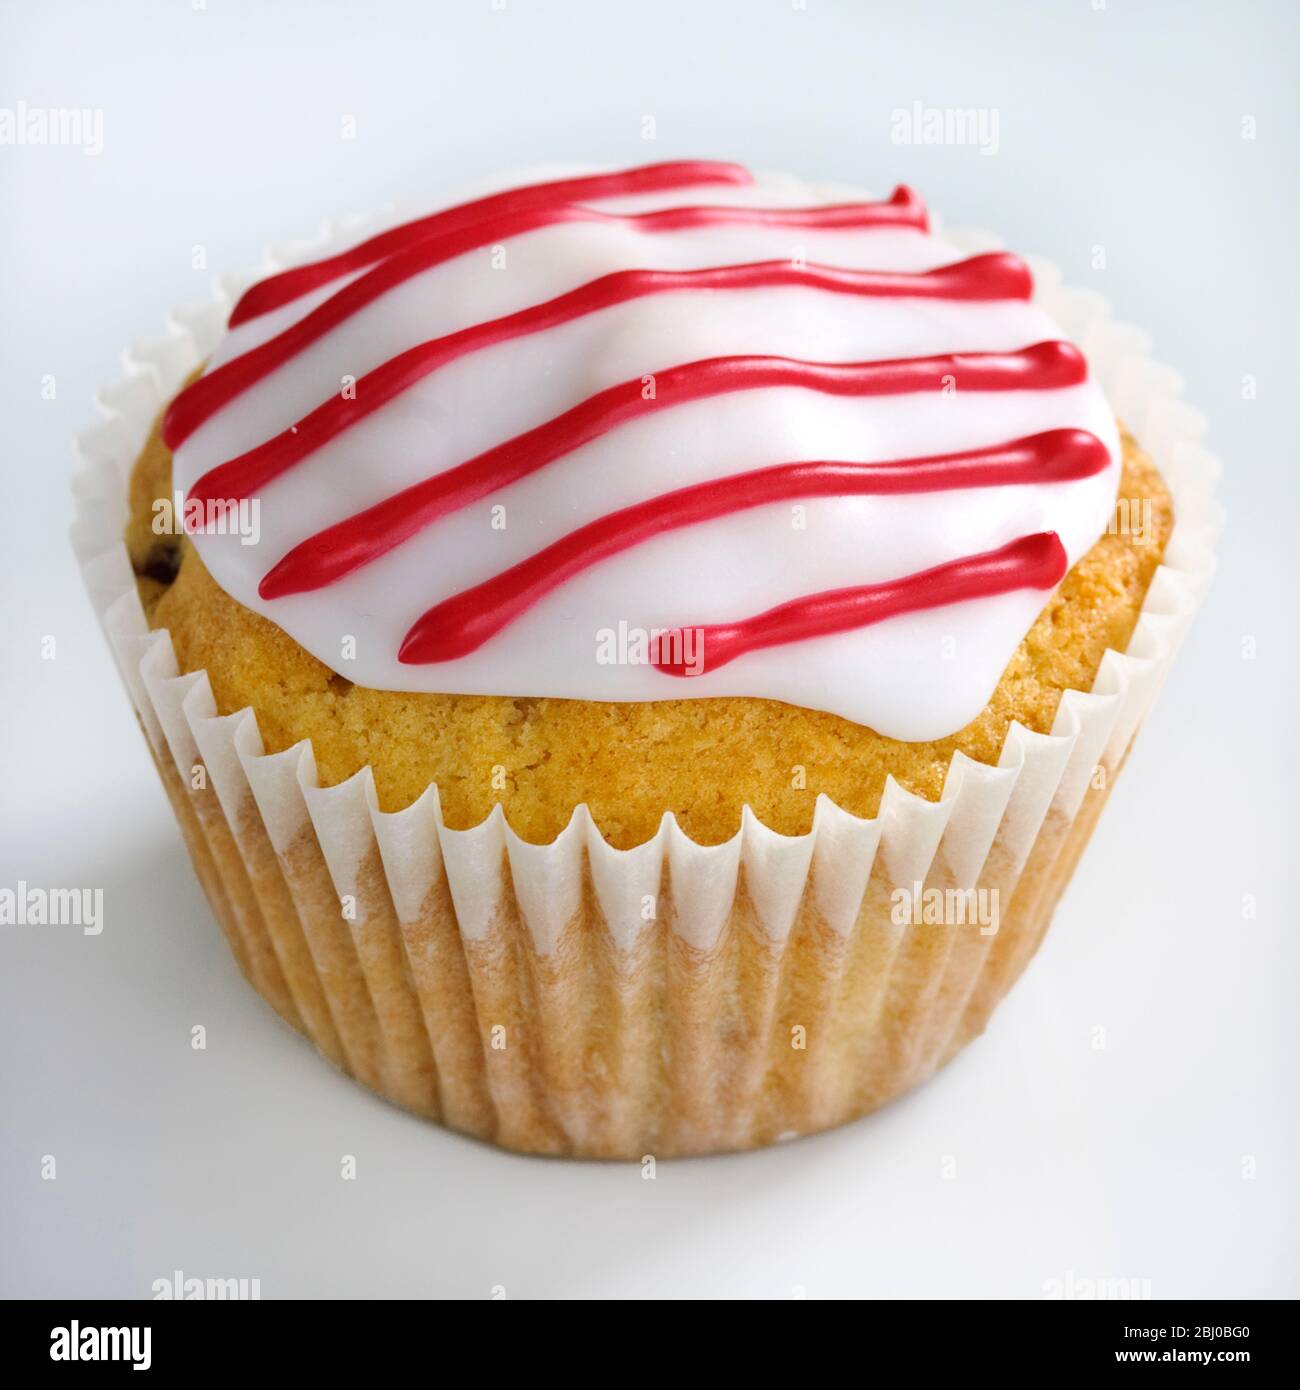 Iced cupcake with red stripes on white icing - Stock Photo